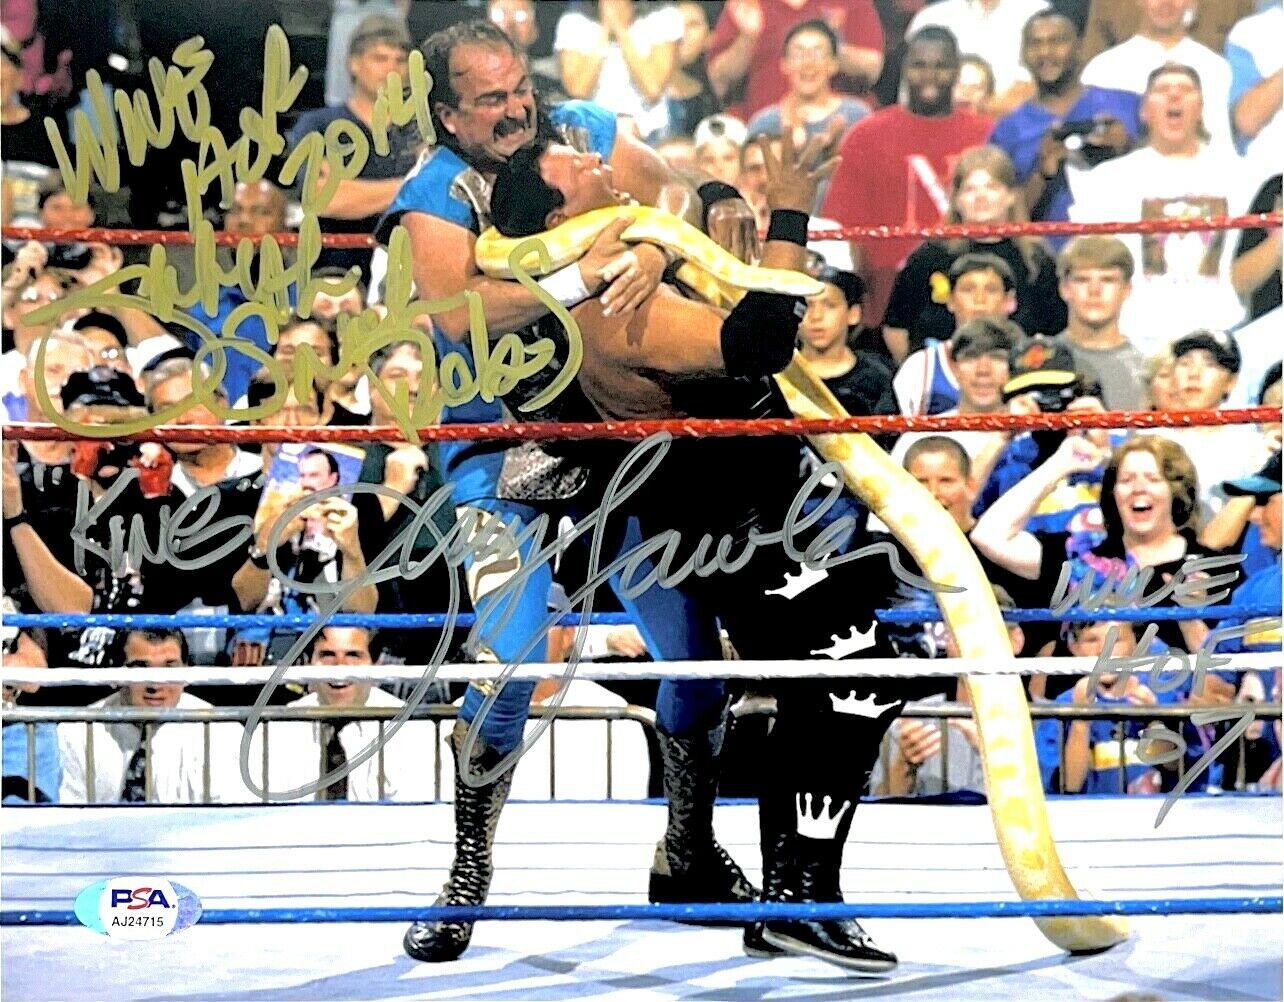 WWE JERRY LAWLER JAKE THE SNAKE HAND SIGNED AUTOGRAPHED 8X10 Photo Poster painting WITH PSA COA